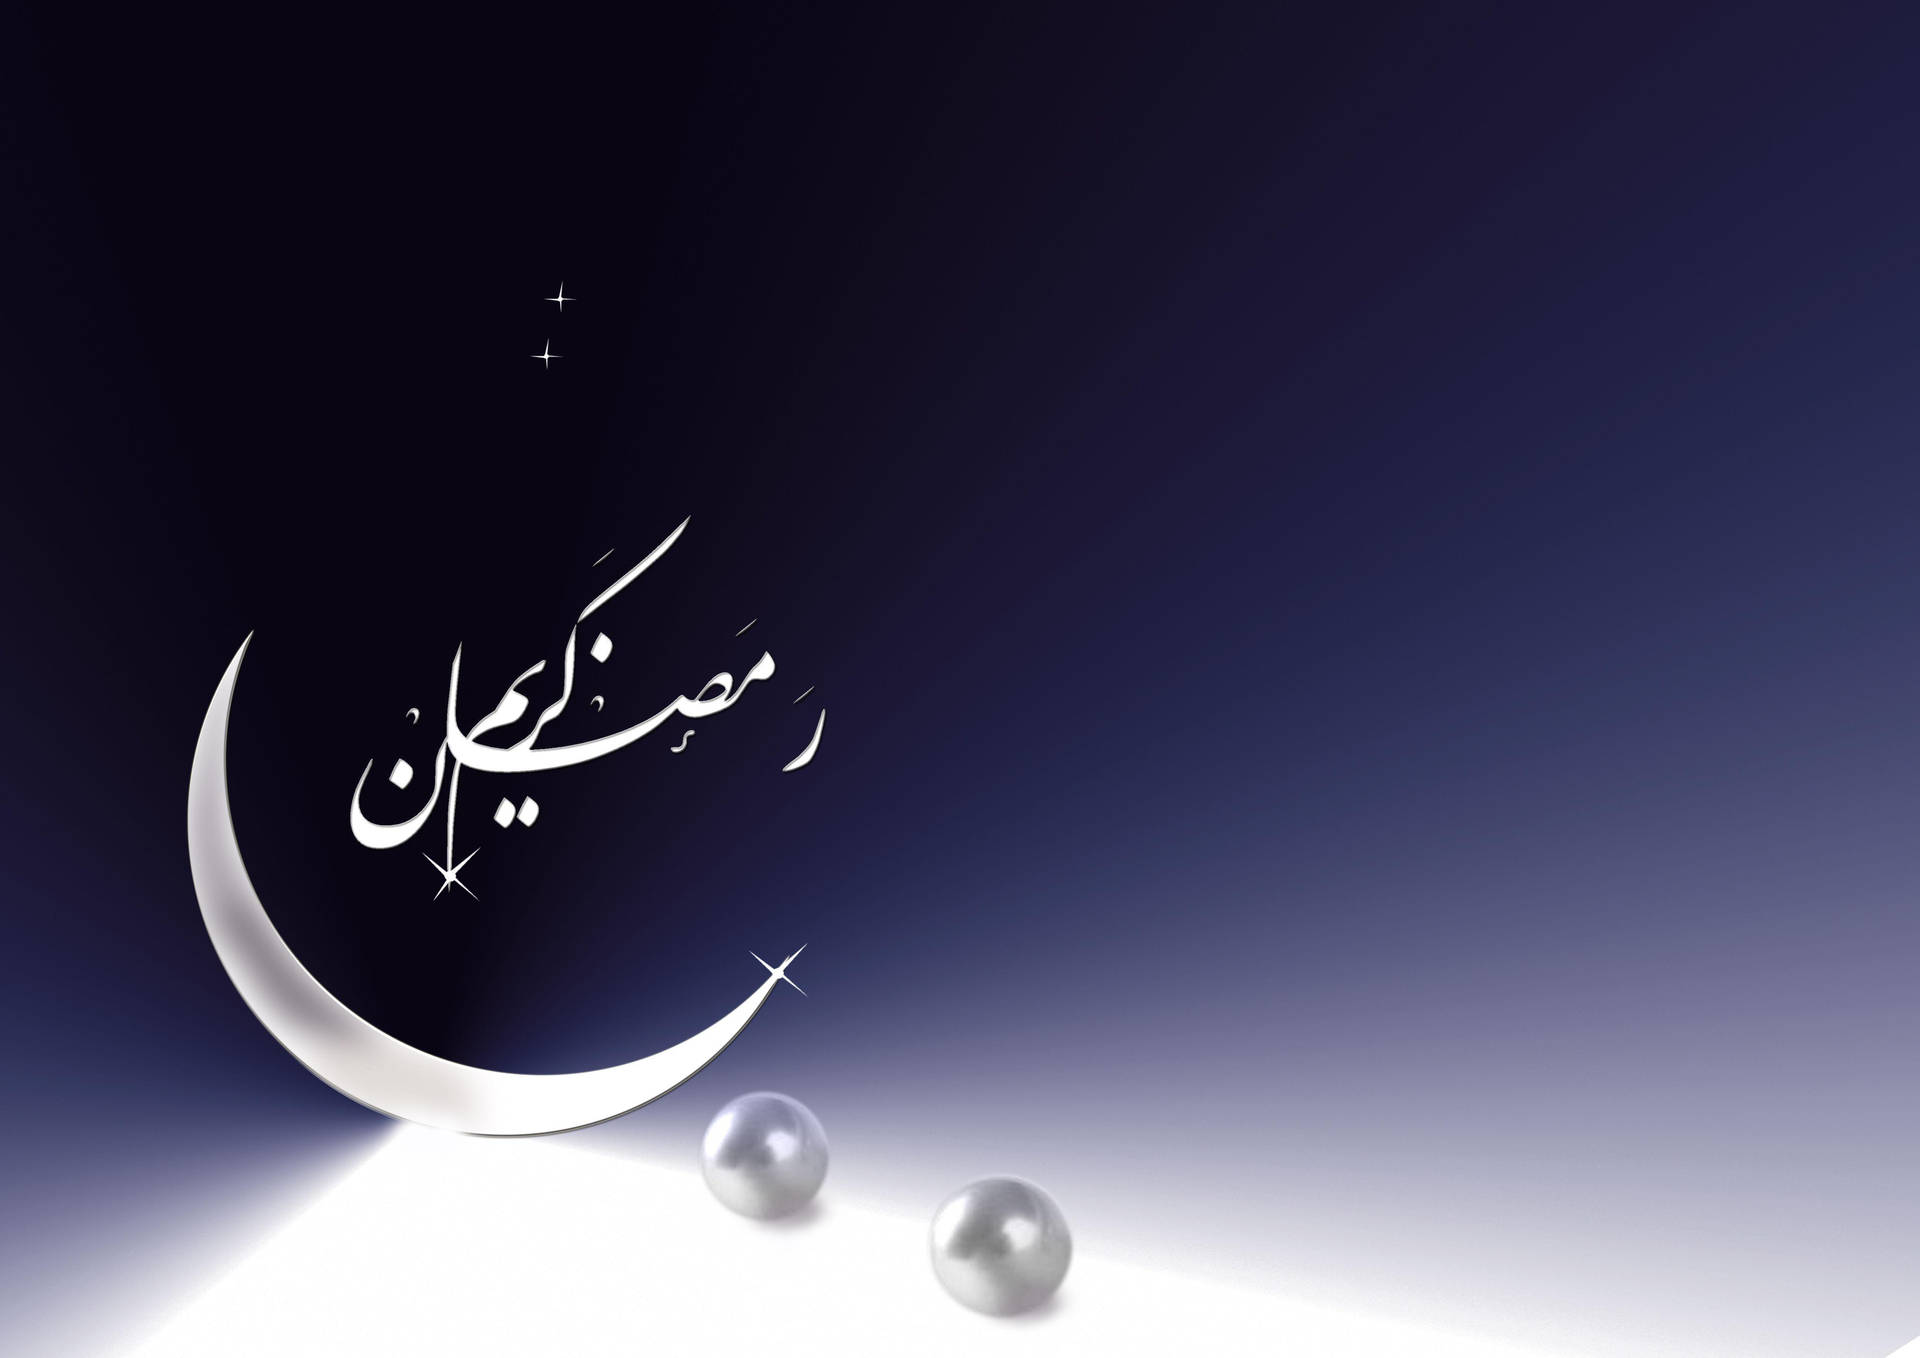 Ramadan With Pearls And Crescent Moon